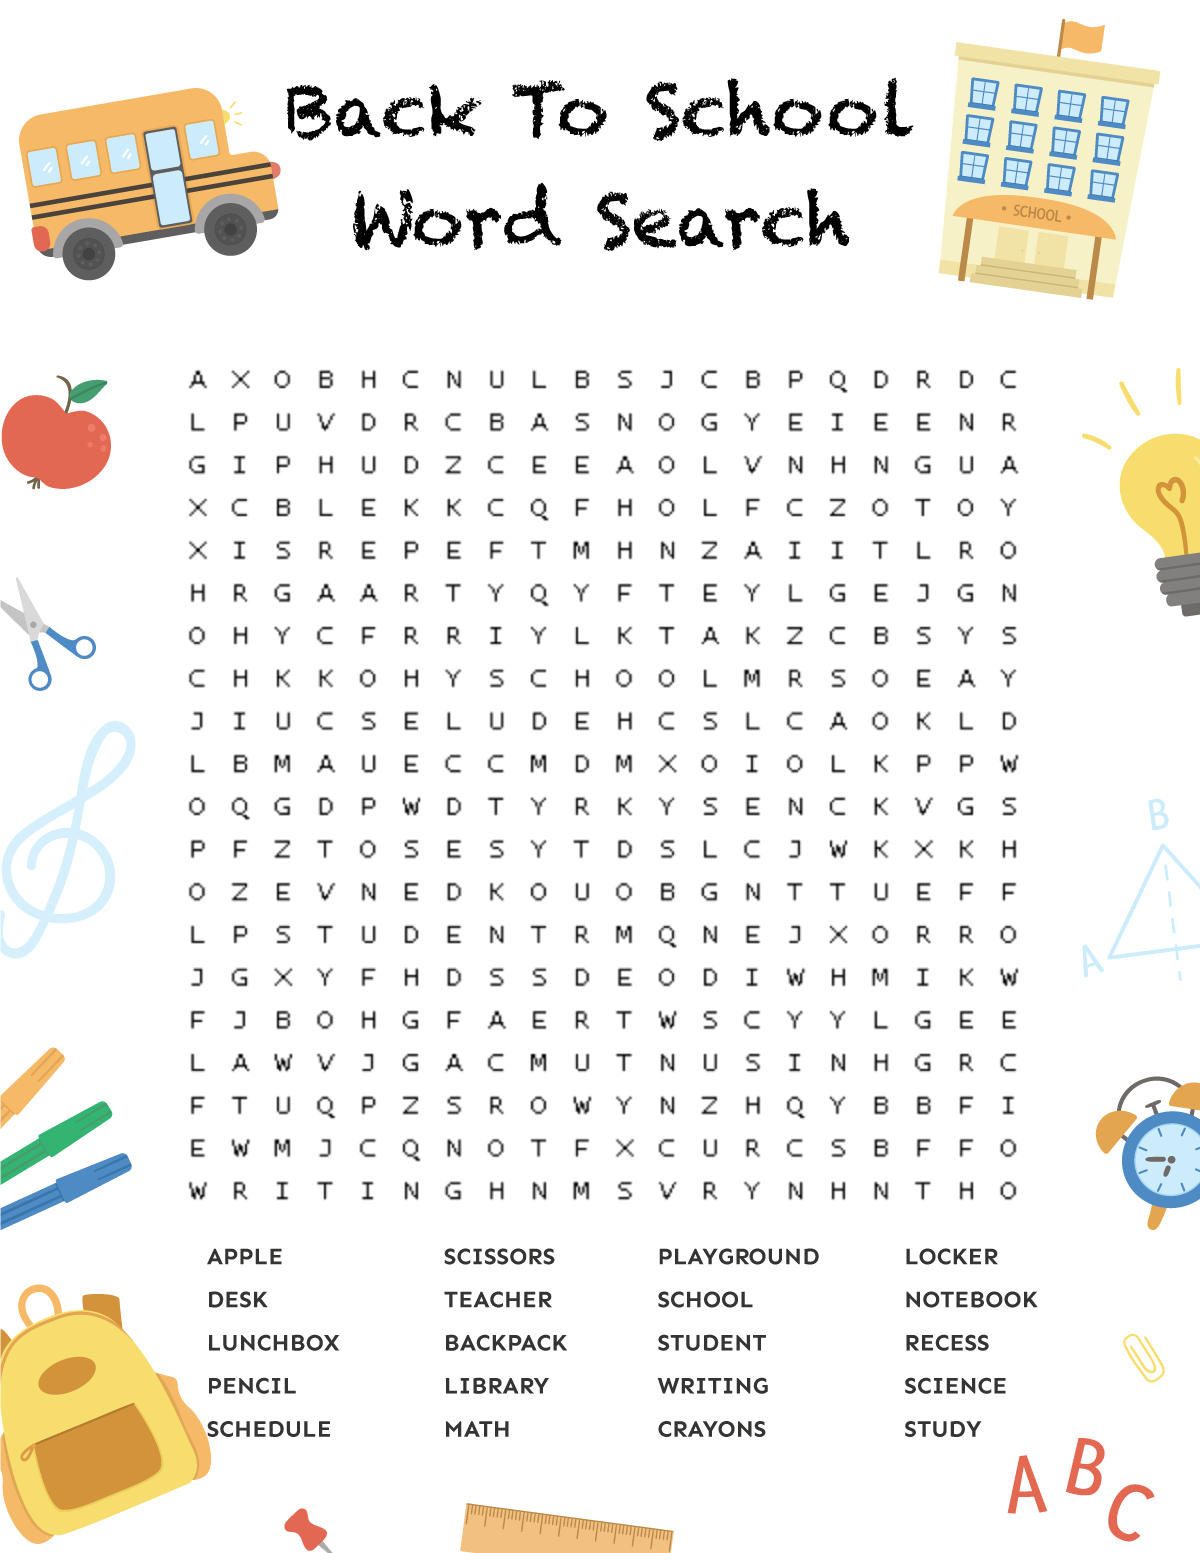 Back To School Word Search FREE Printable Play Party Plan